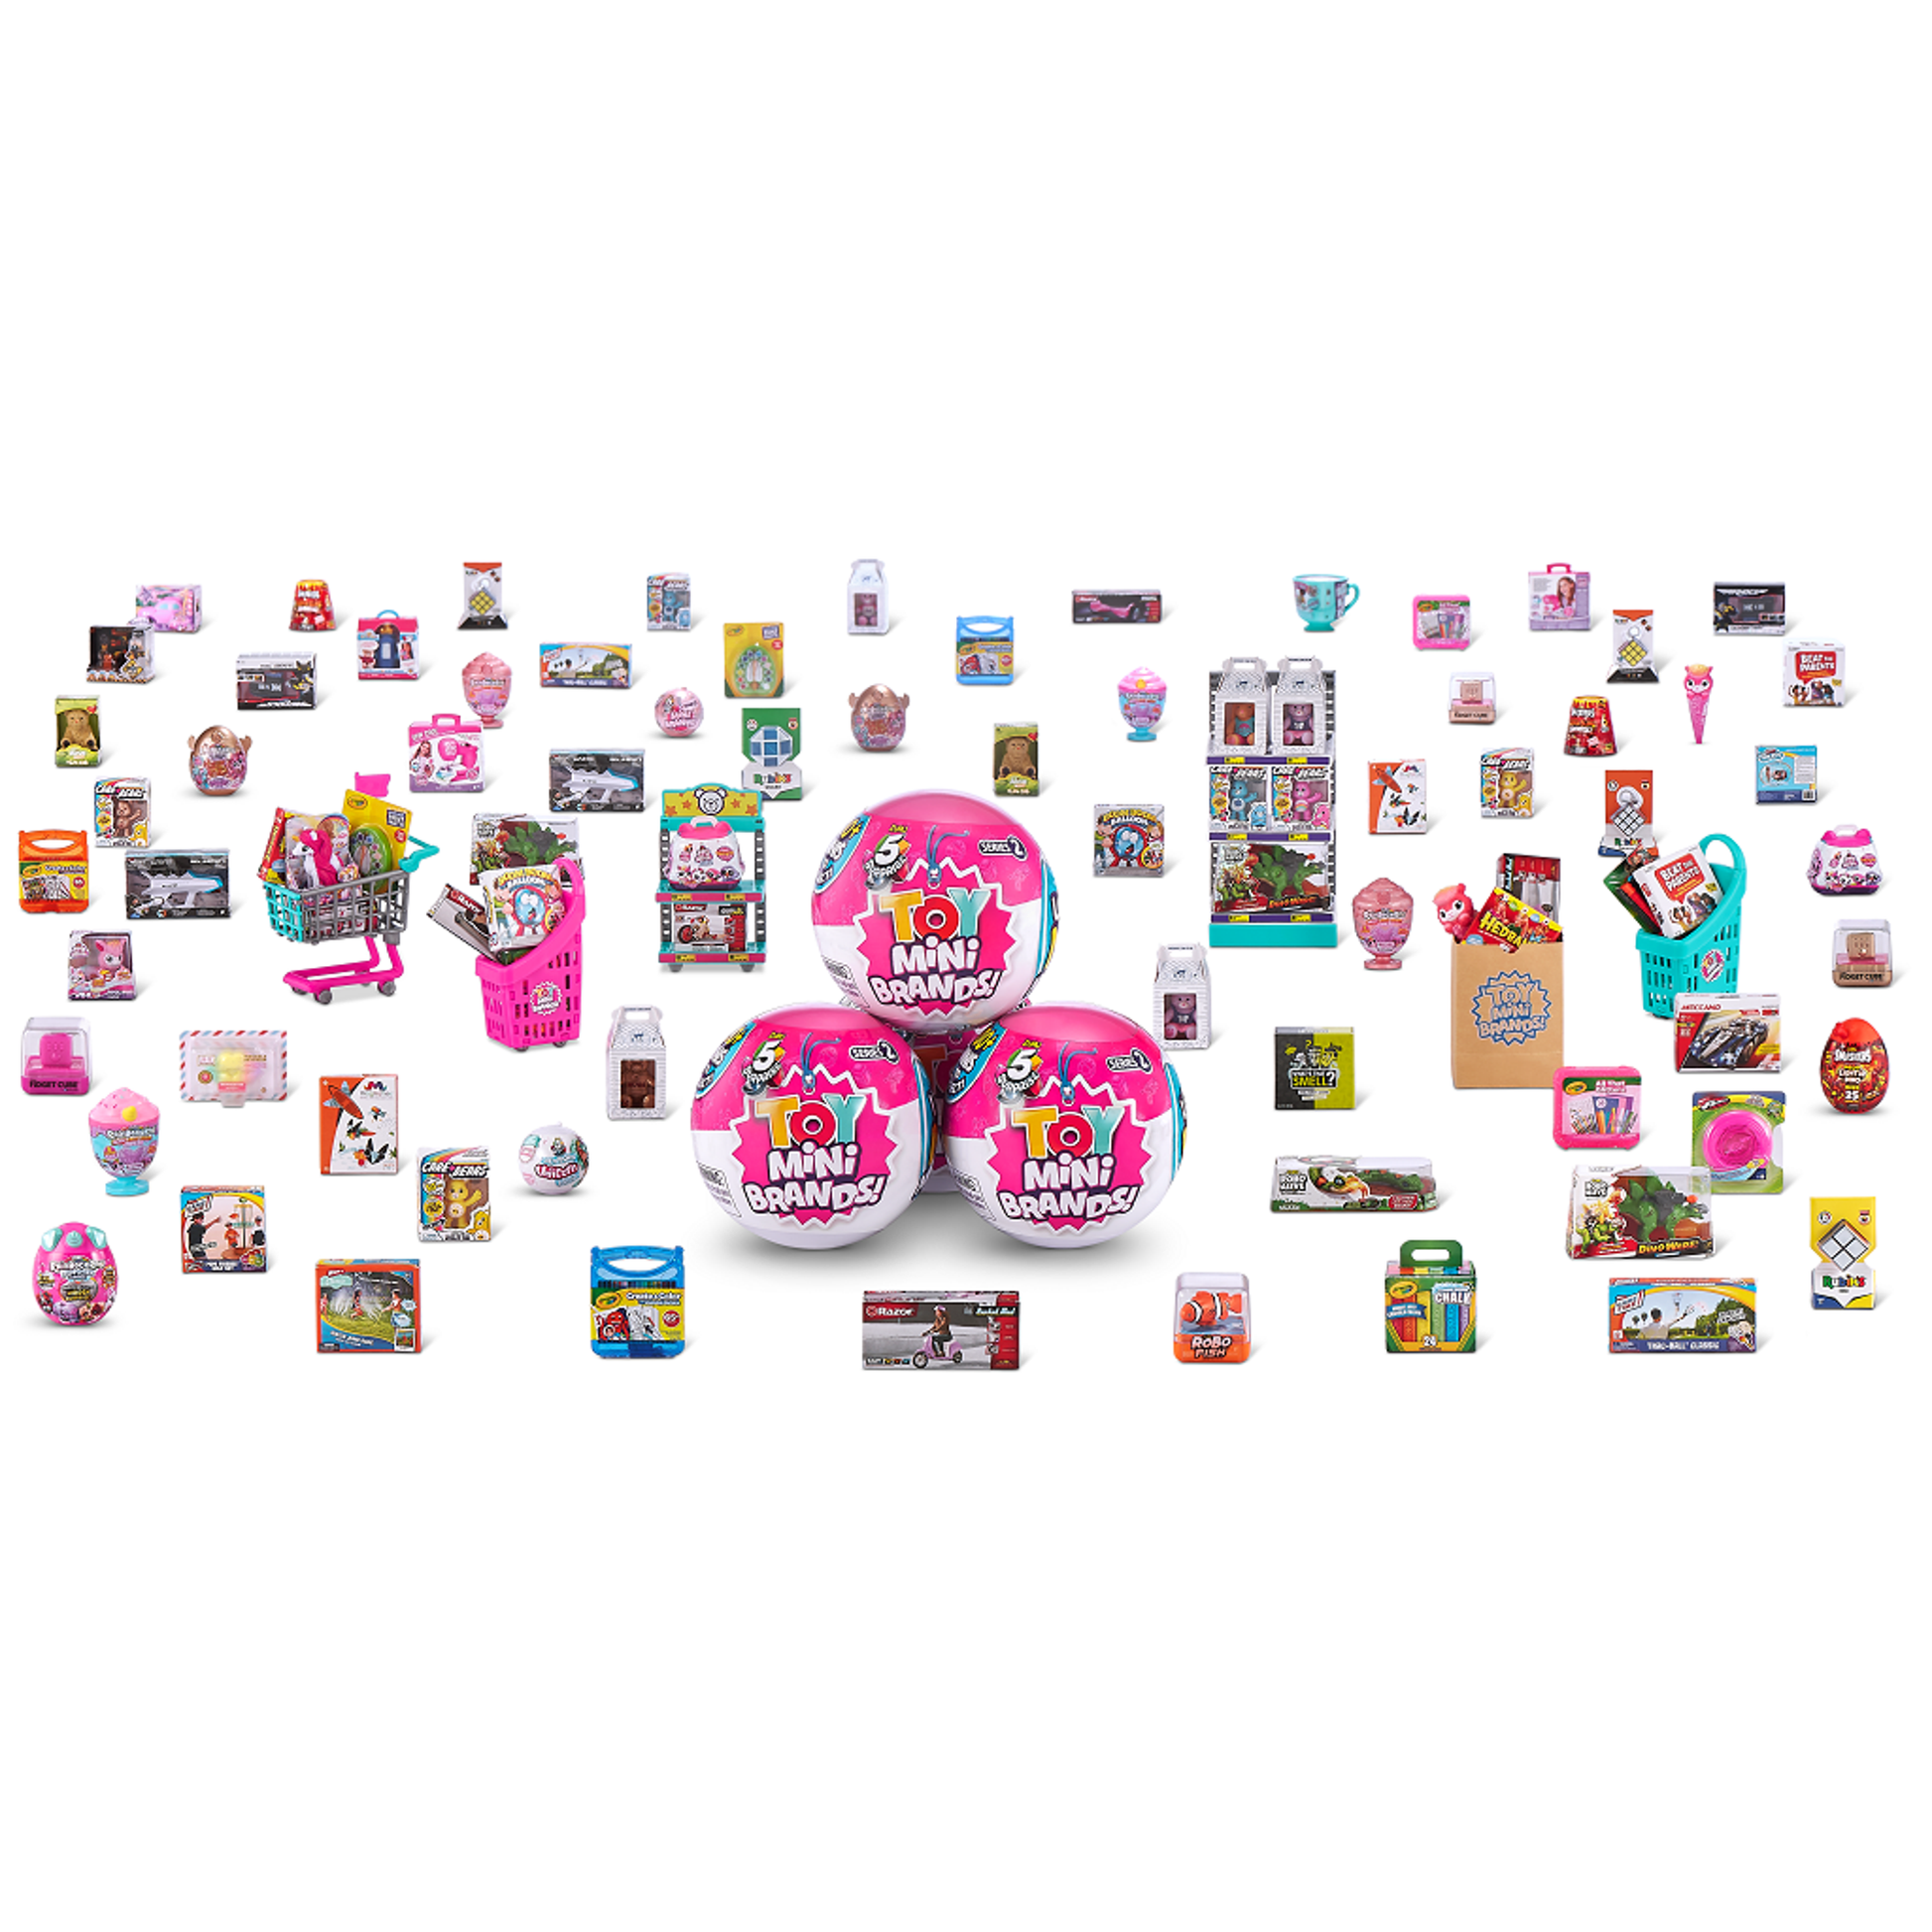  5 Surprise Mini Brands Disney Store Series 2 Mystery Capsule  Collectible Toy (4 Pack) : Video Games